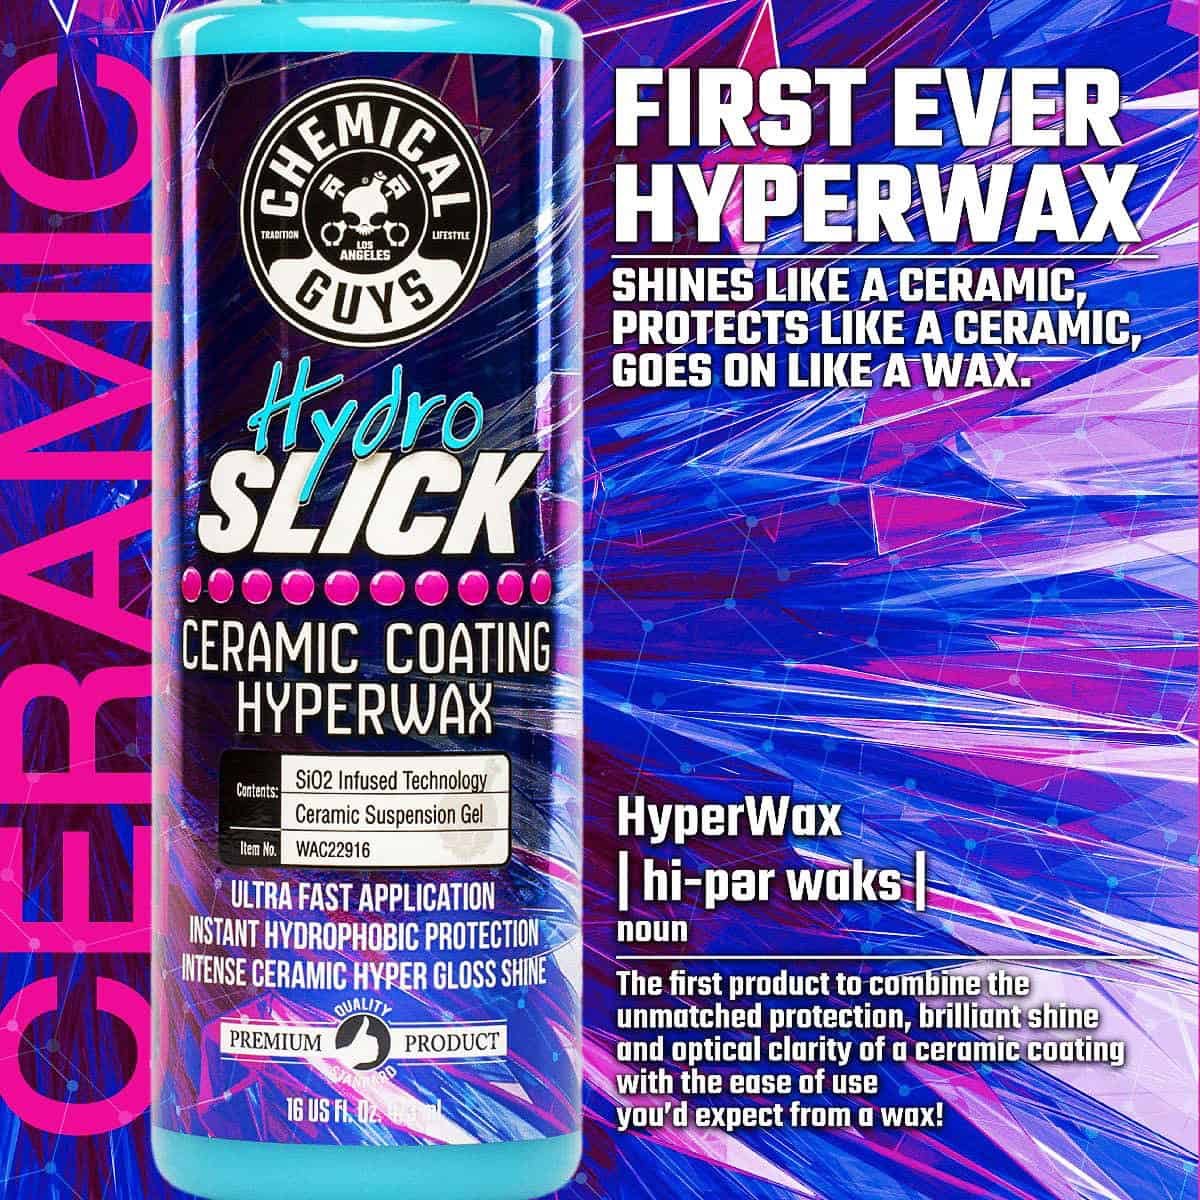 Chemical Guys Hydro Slick Ceramic Coating Hyperwax: Get the deepest shine without wax!1